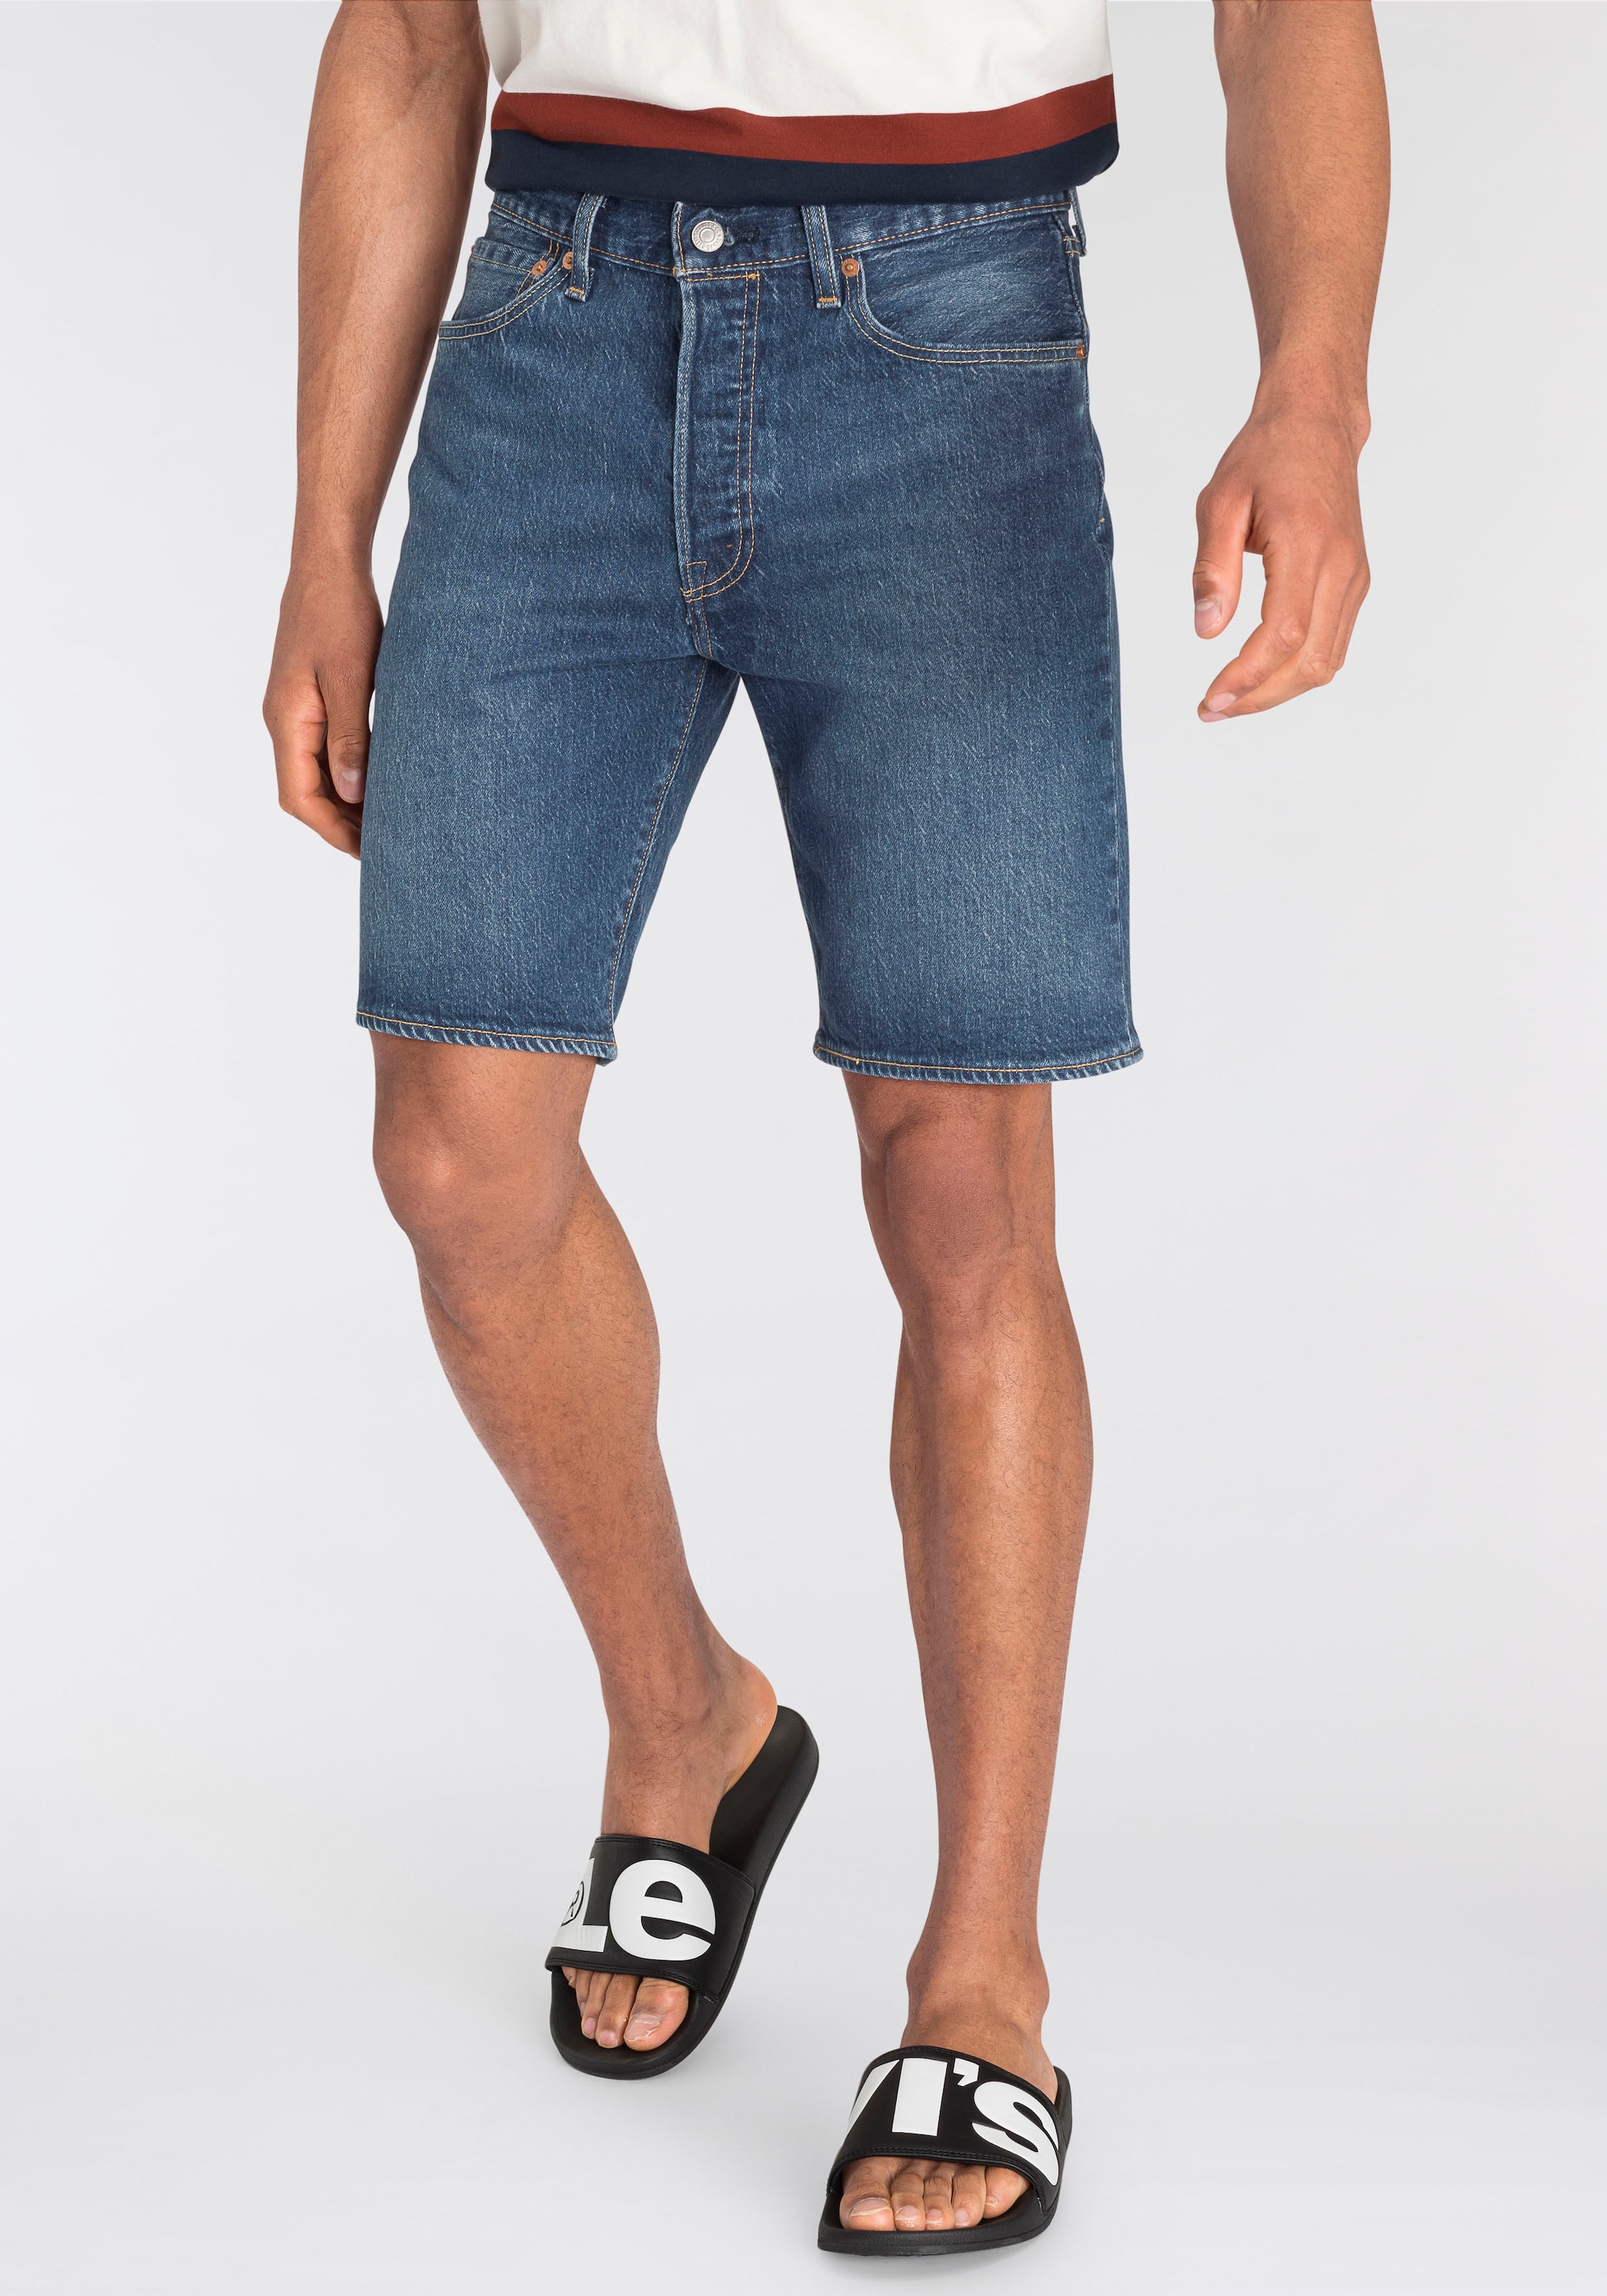 Levis Jeansshorts "501", FRESH COLLECTION, 501 collection